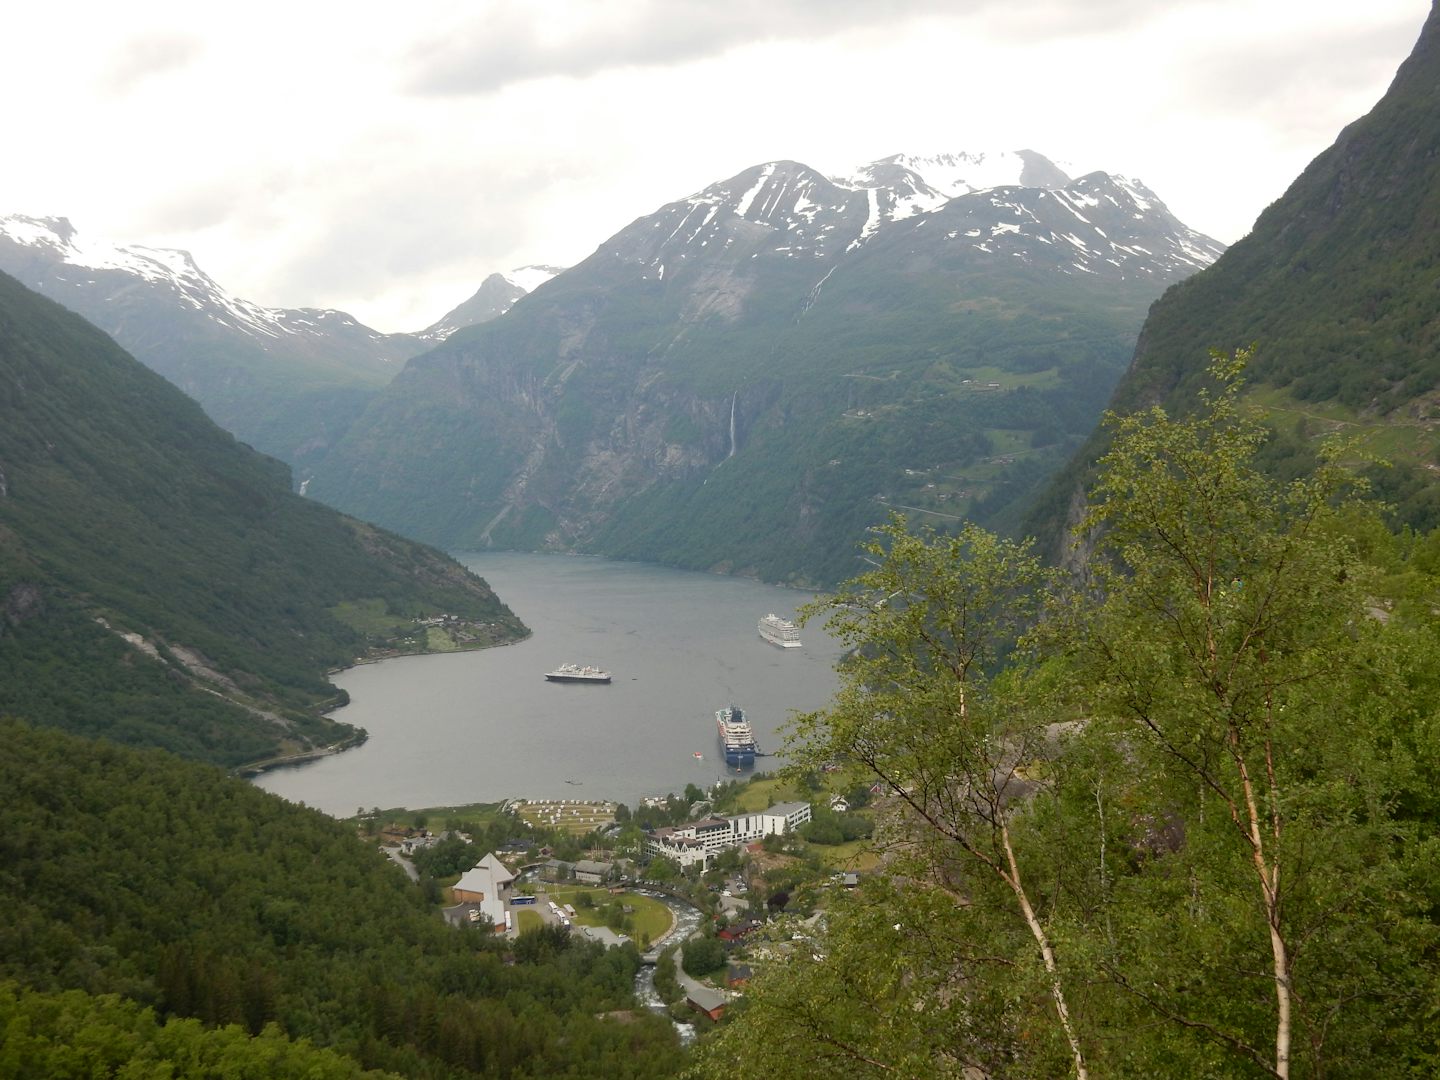 Geiranger Fjord, Norway from the bus tour